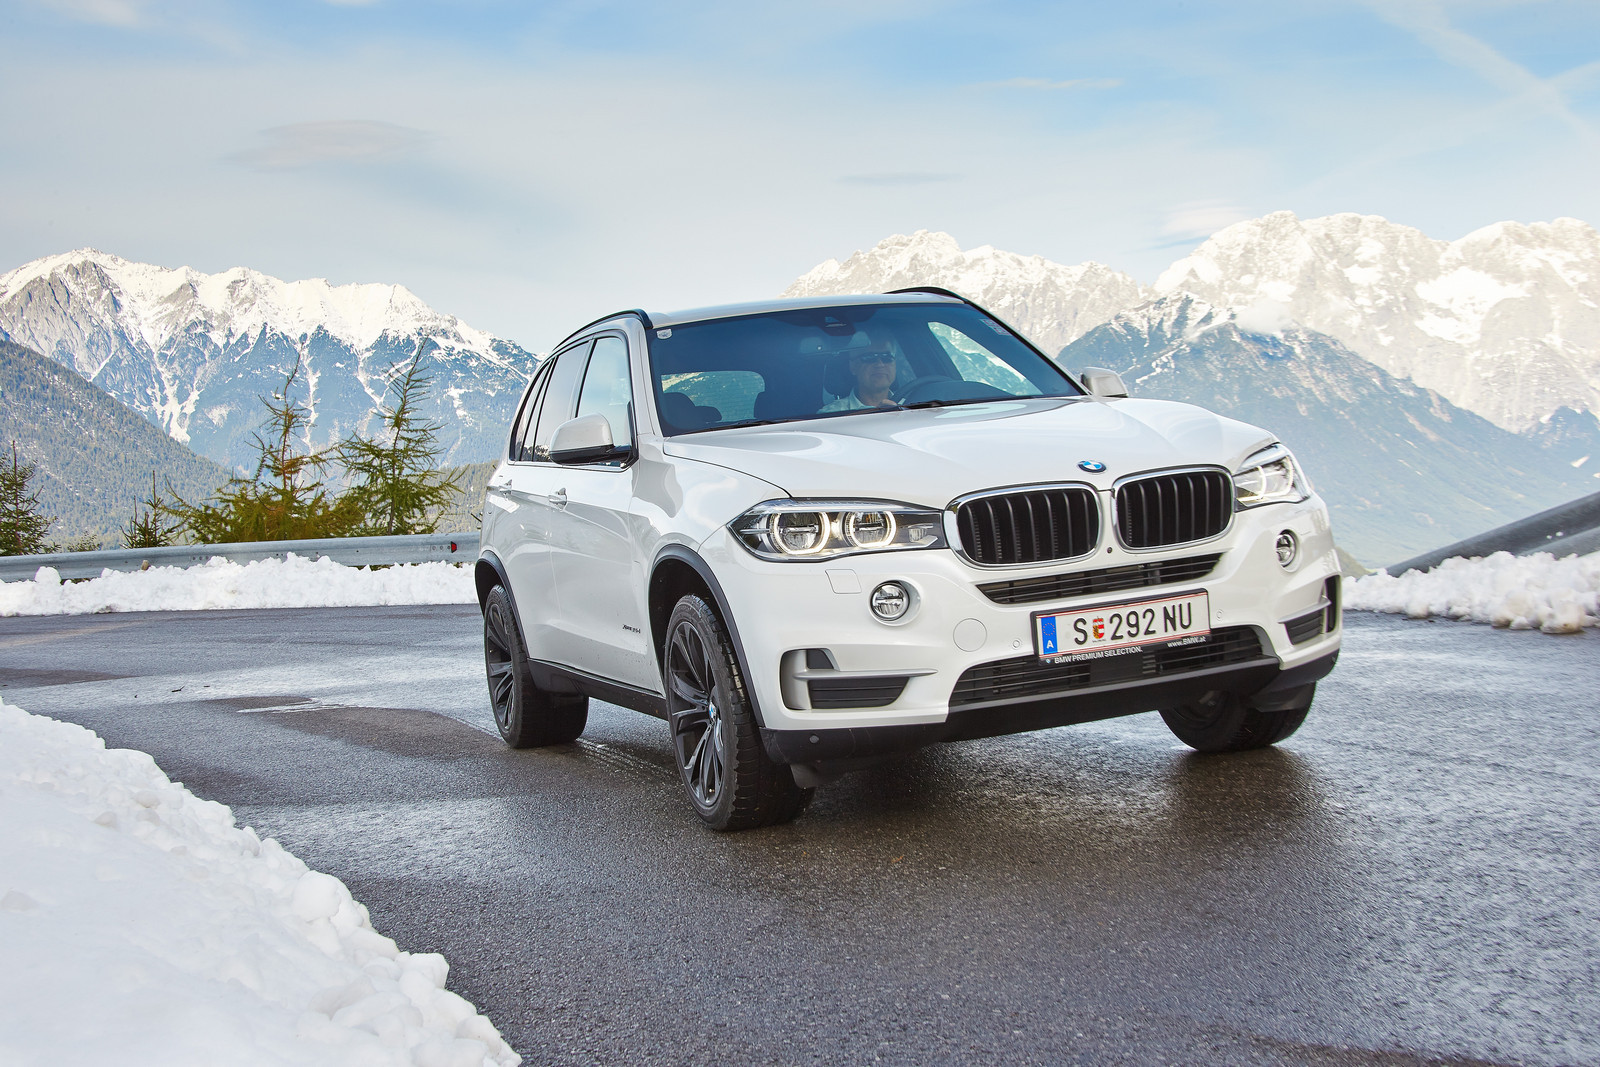 The new BMW X5 2013